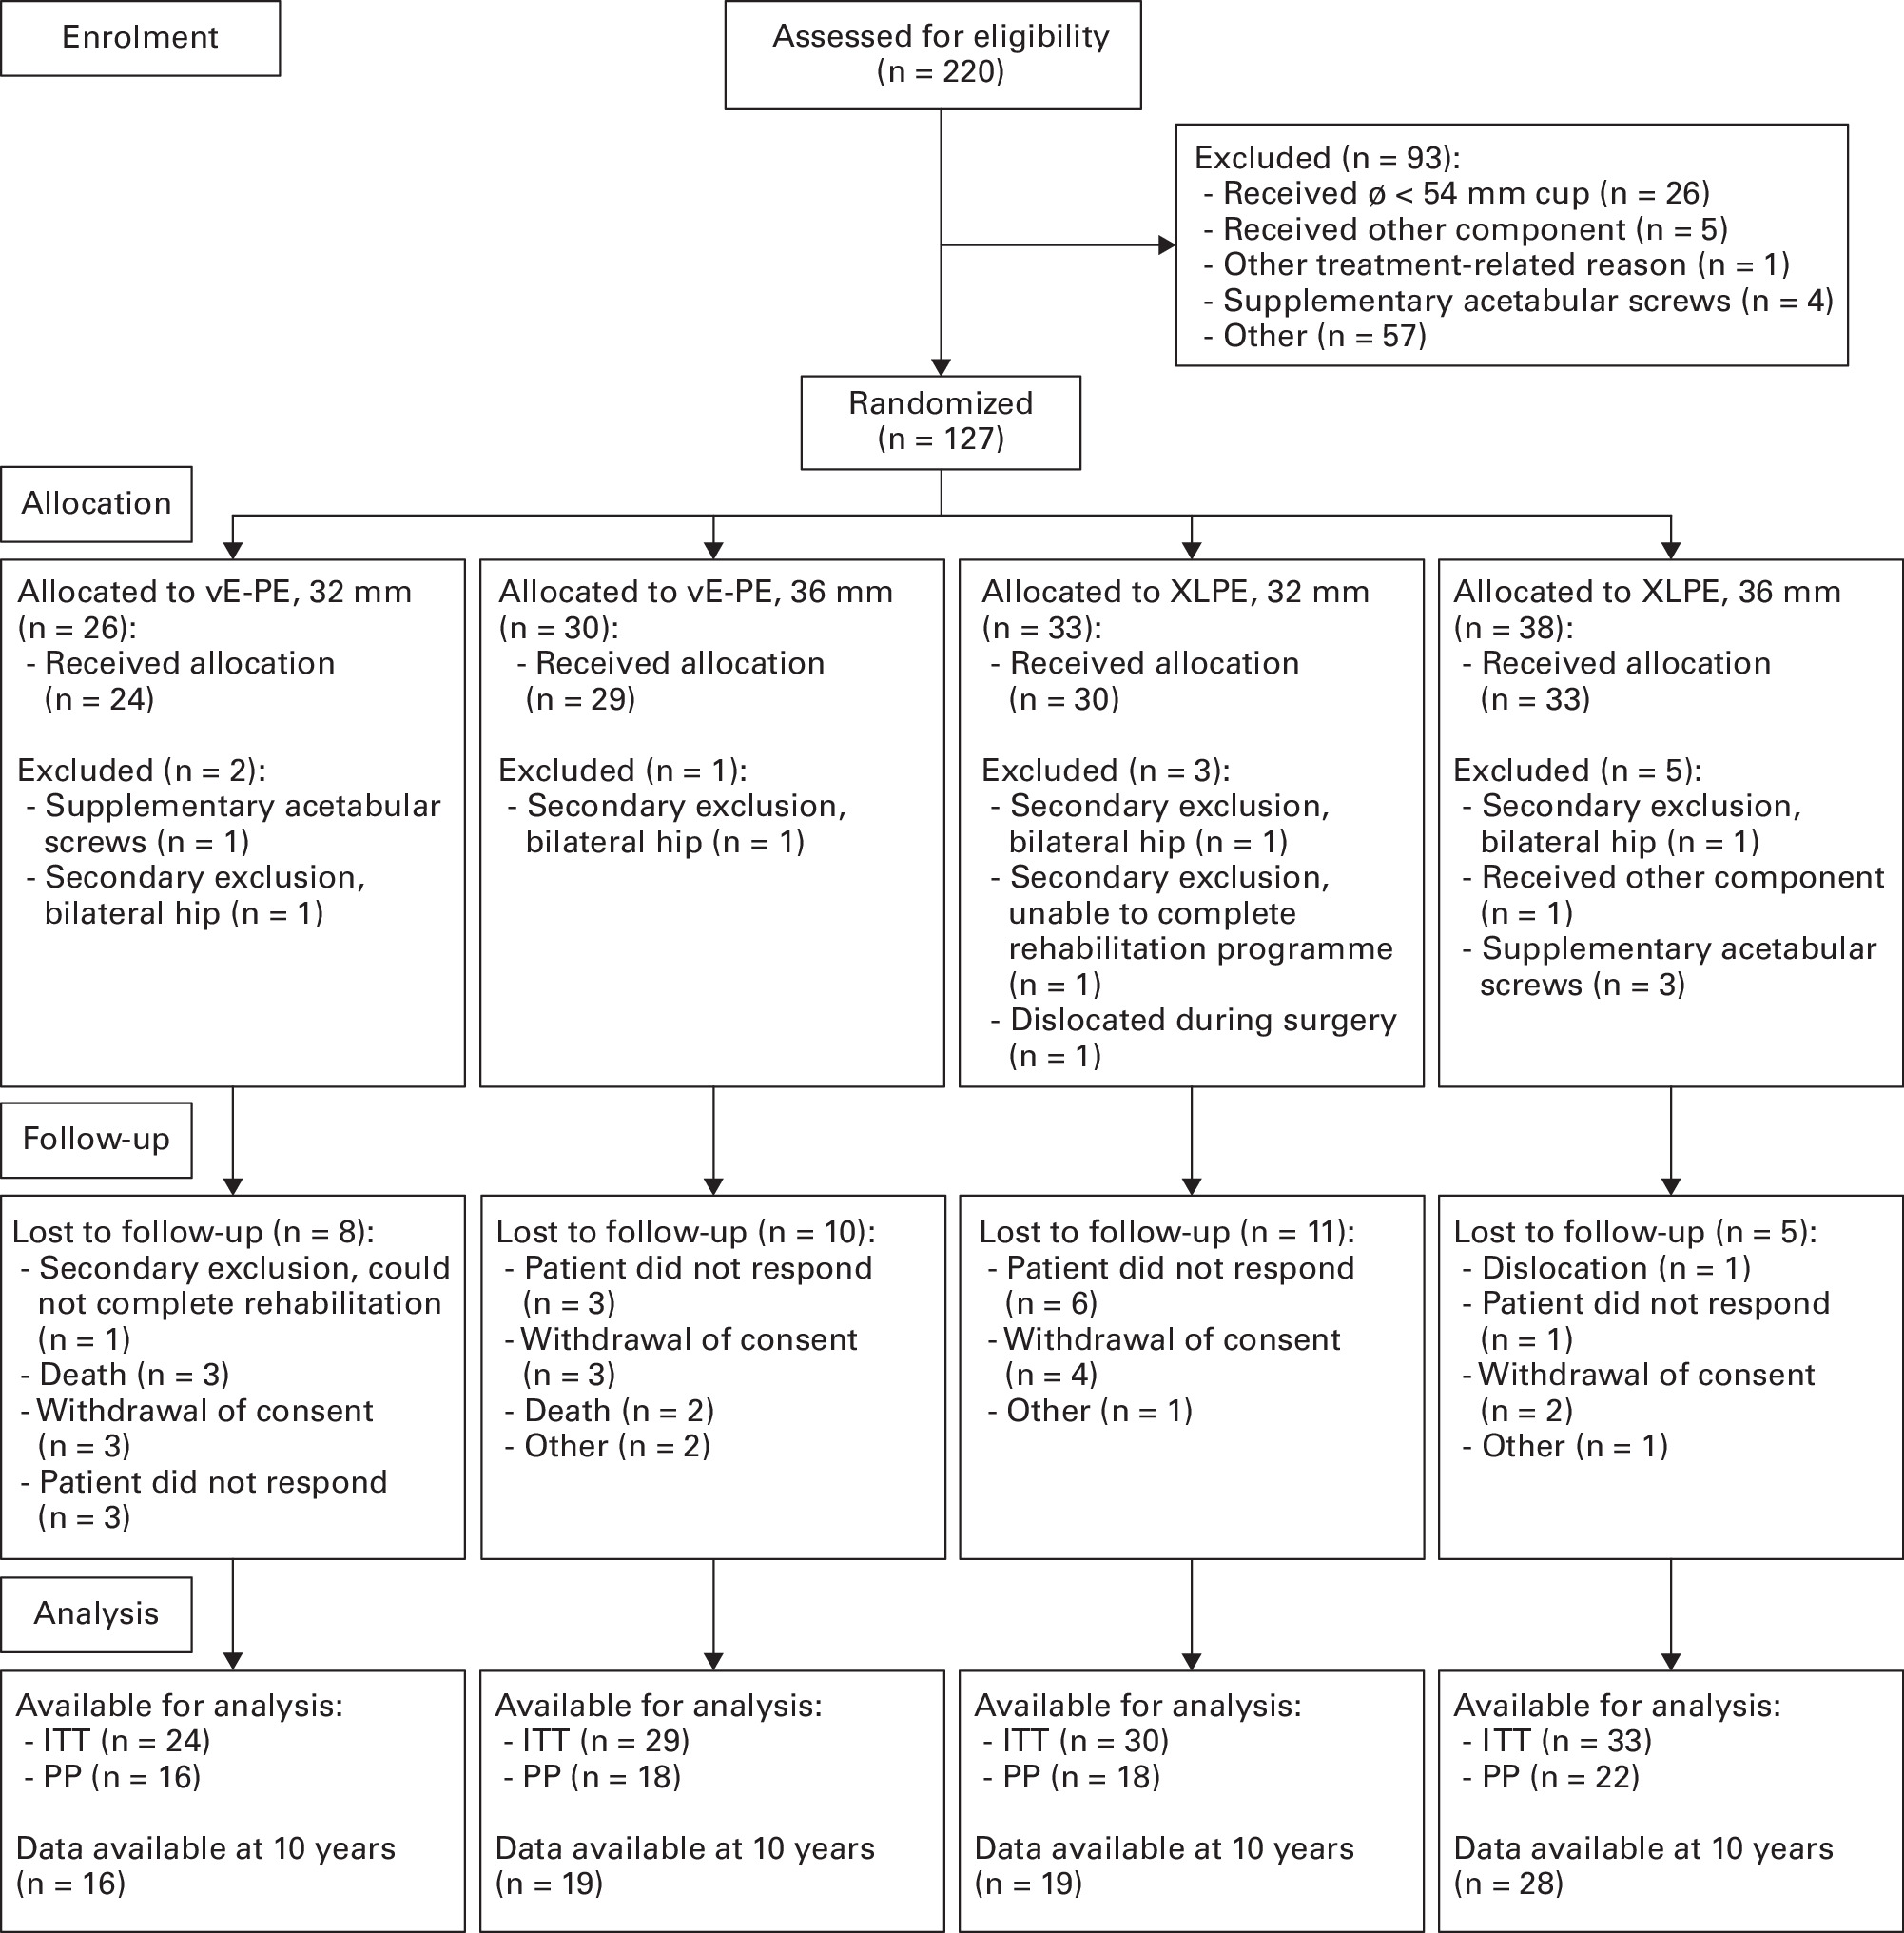 Fig. 1 
            Flowchart in accordance with Consolidated Standards of Reporting Trials guidelines.18 The flow diagram shows the number of total hip arthroplasty patients who initially agreed to participate and were assessed for eligibility, then randomized and allocated to one of the four interventions: a vitamin E-diffused polyethylene liner (vE-PE) with a 32 mm head or 36 mm head, or a cross-linked polyethylene liner (XLPE) with a 32 mm head or 36 mm head.Note that the group ‘Other’ were excluded as a result of no screening data being available for these patients. ITT, intention-to-treat; PP, per protocol. ∅ = diameter.
          